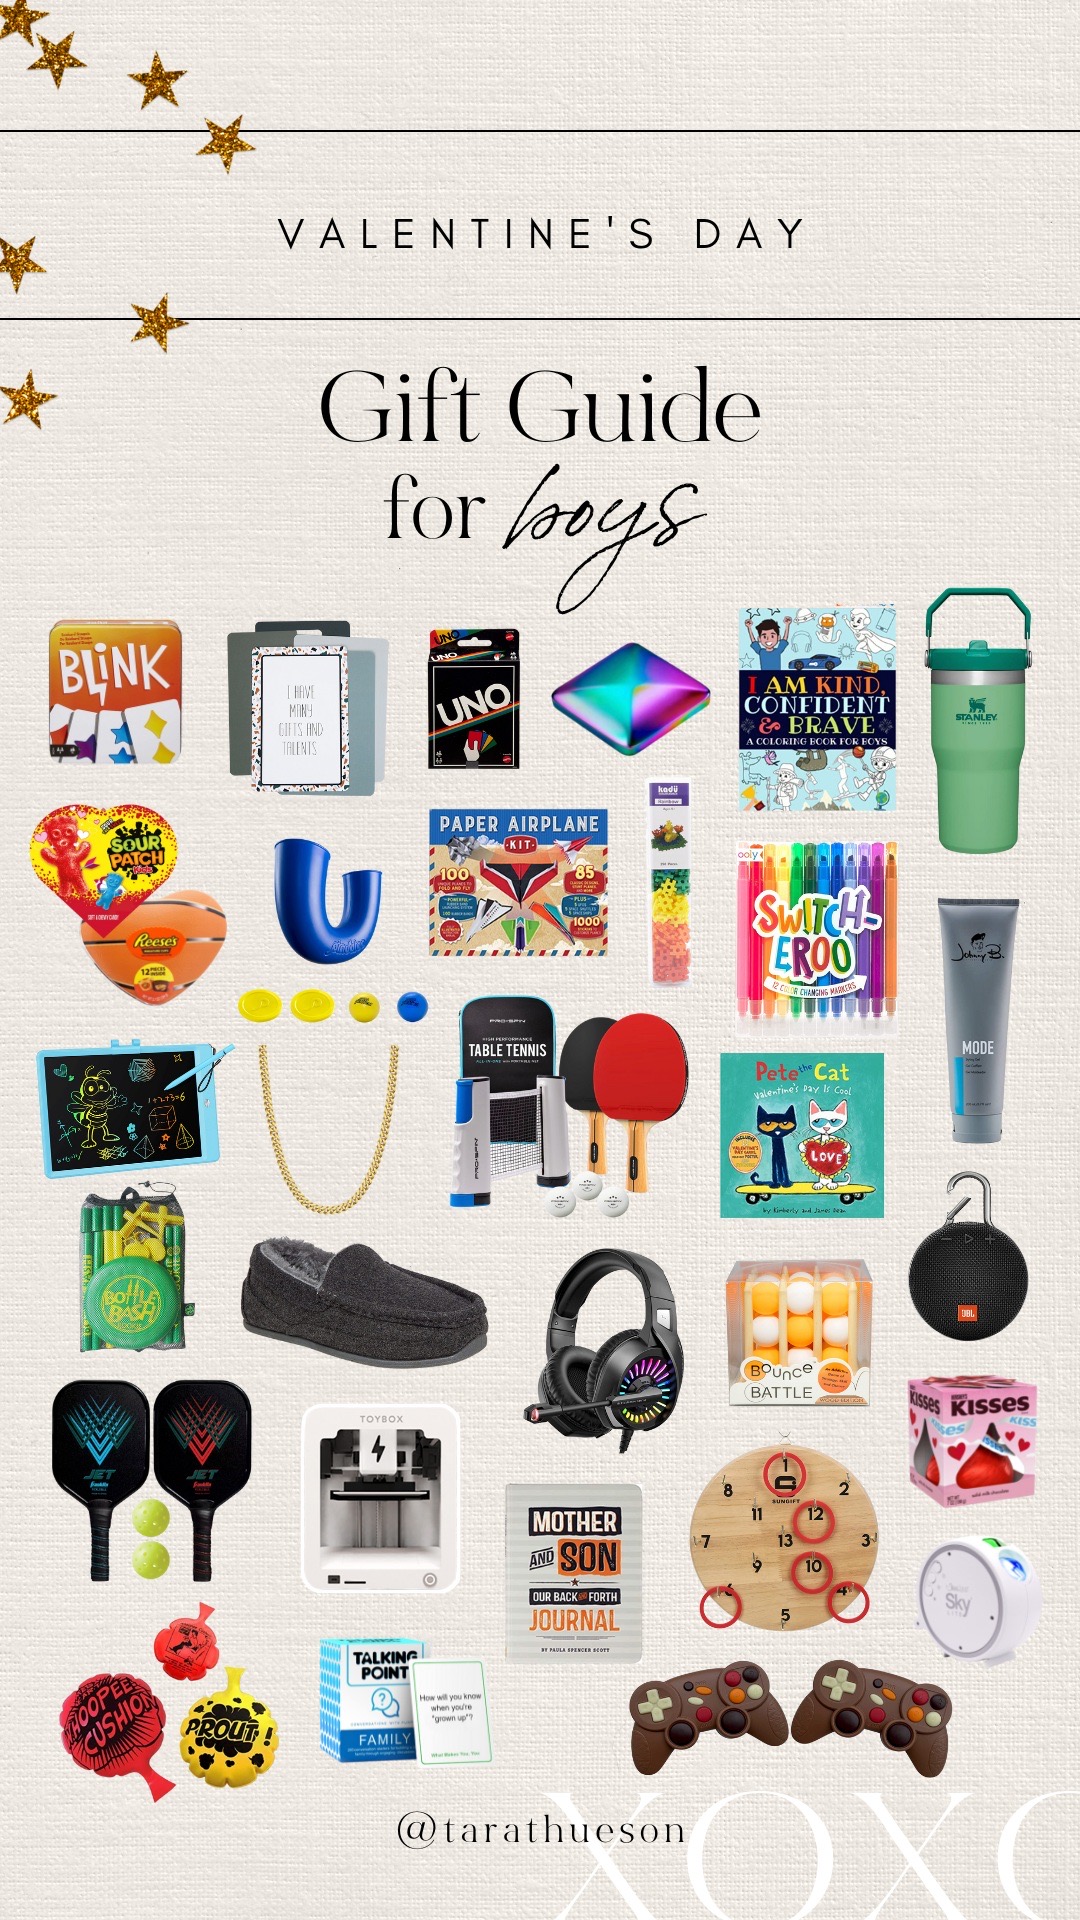 Valentines Day 2023 Gift Guide